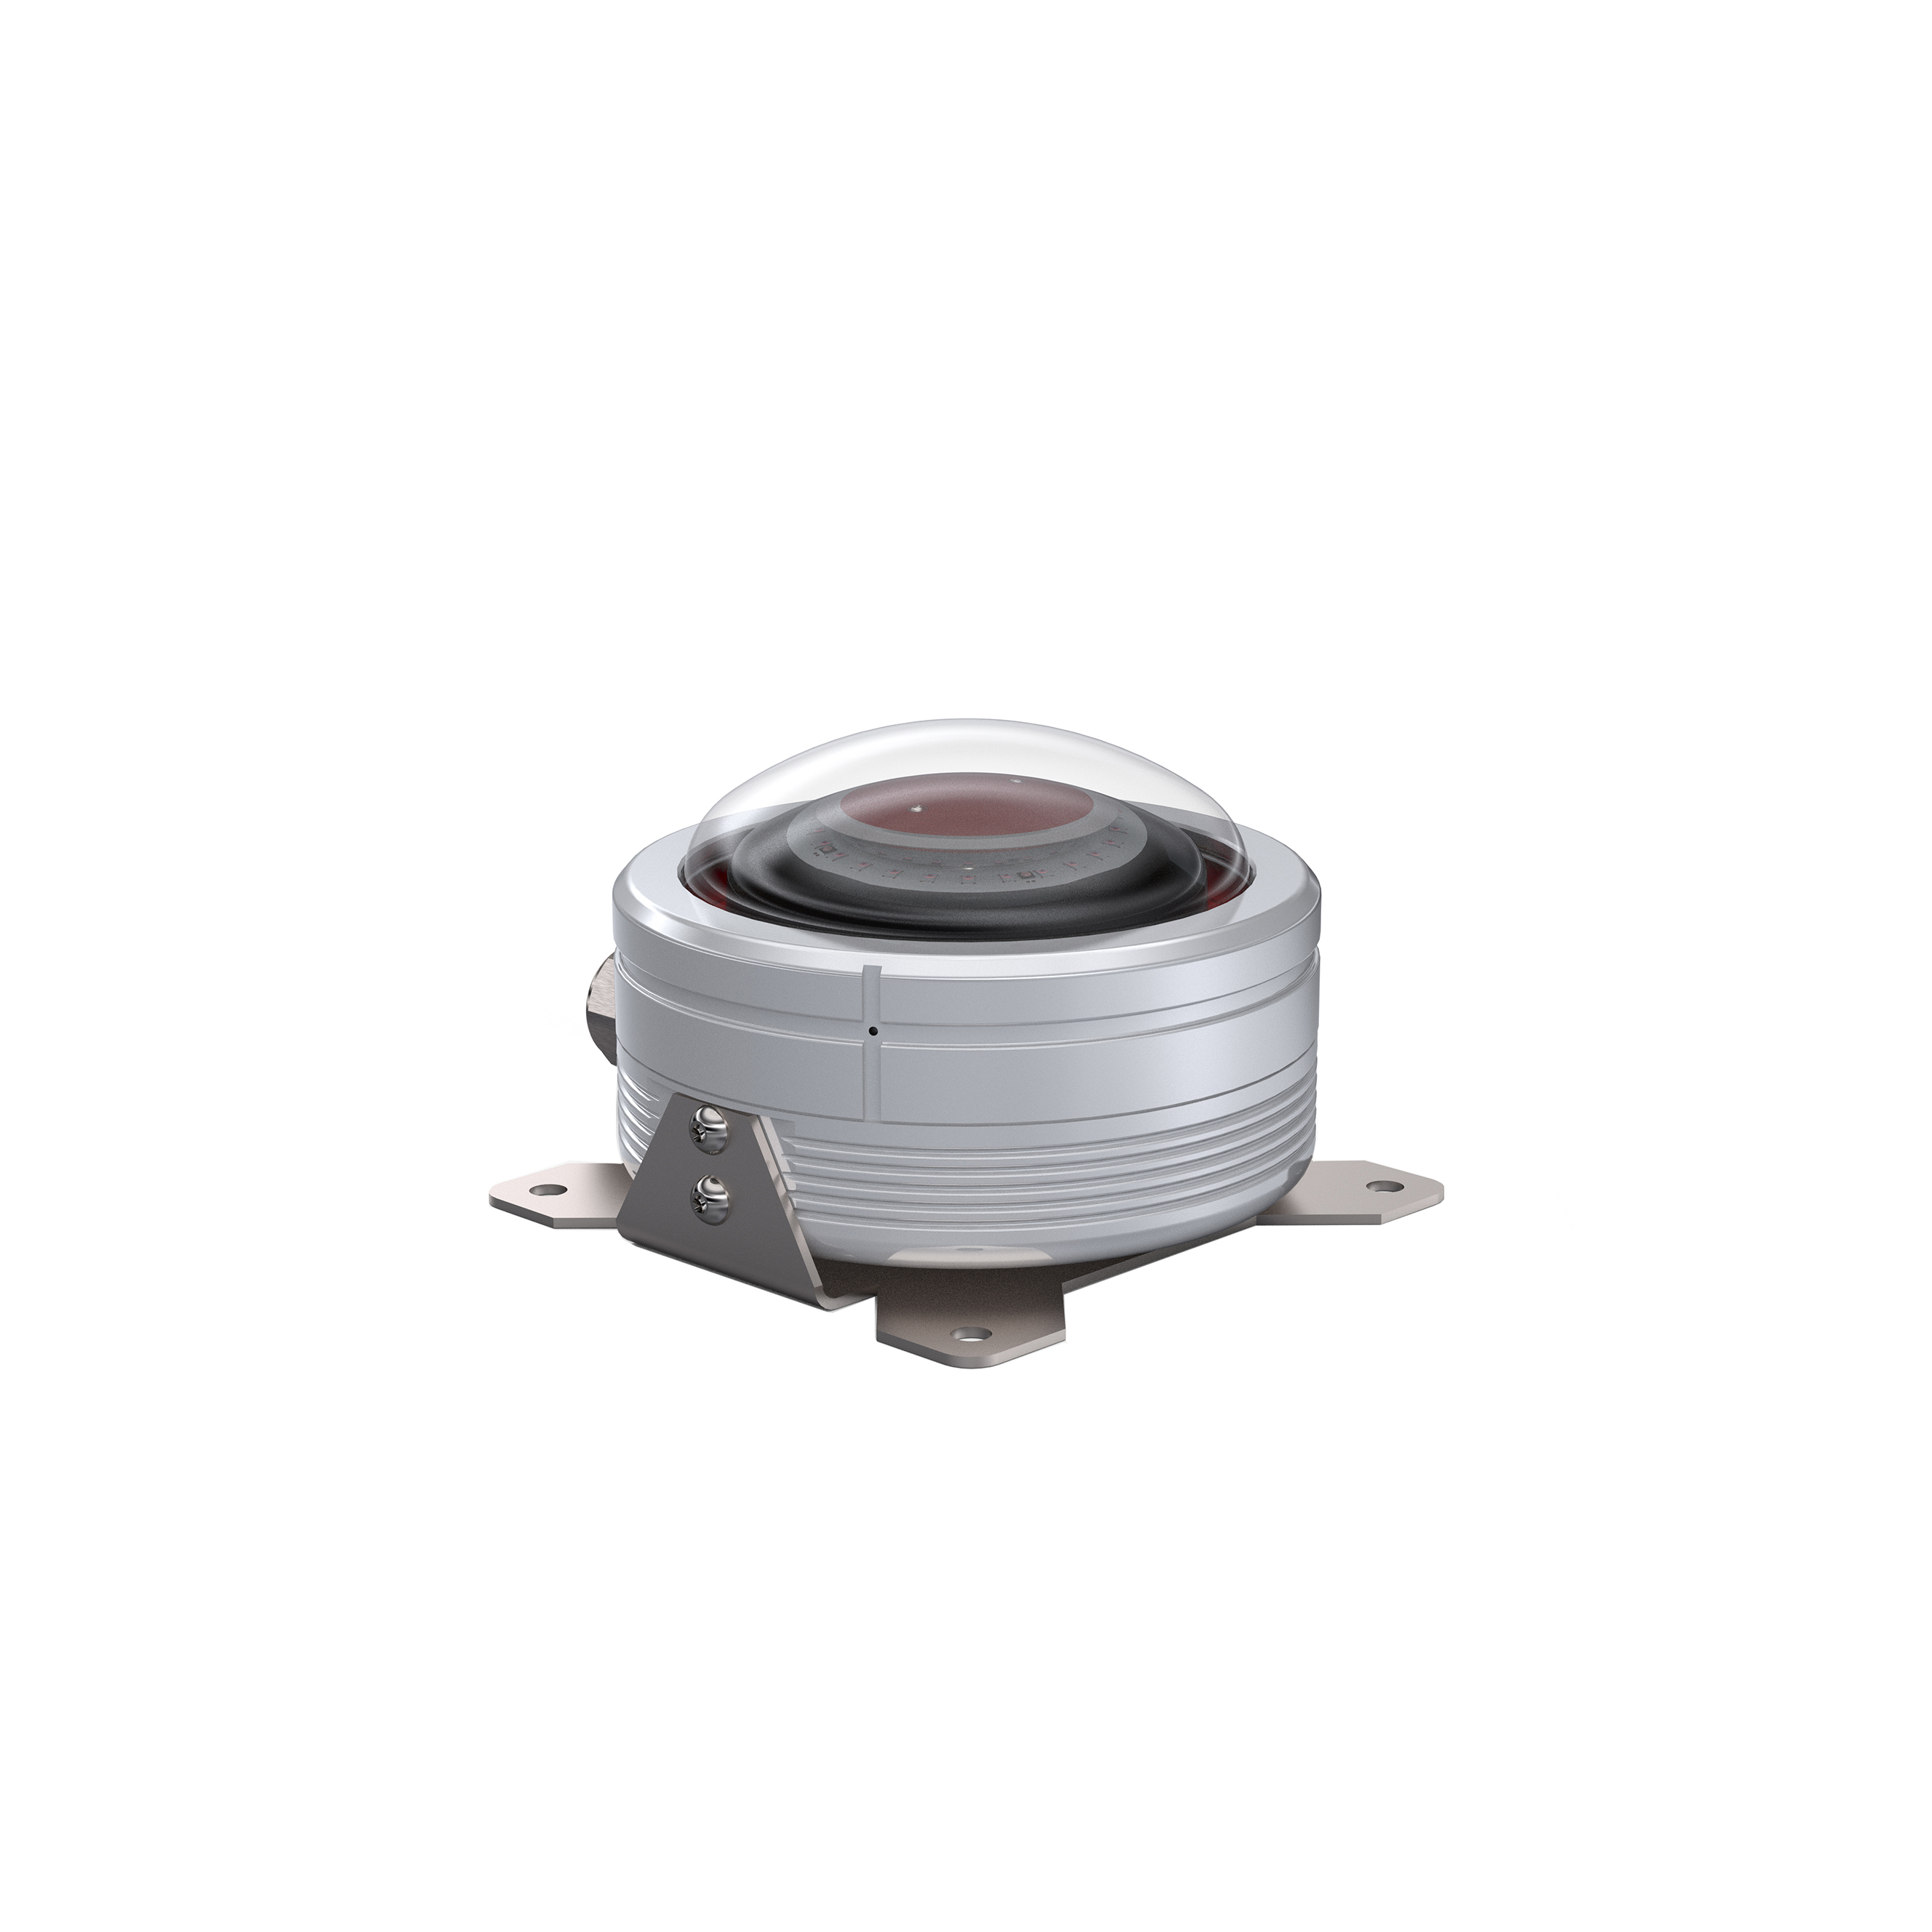 TEF 9980 Helideck Status Light - Repeater Light - LOW PROFILE 24VDC, EX, IP 66/67, incl. 3m cable photo